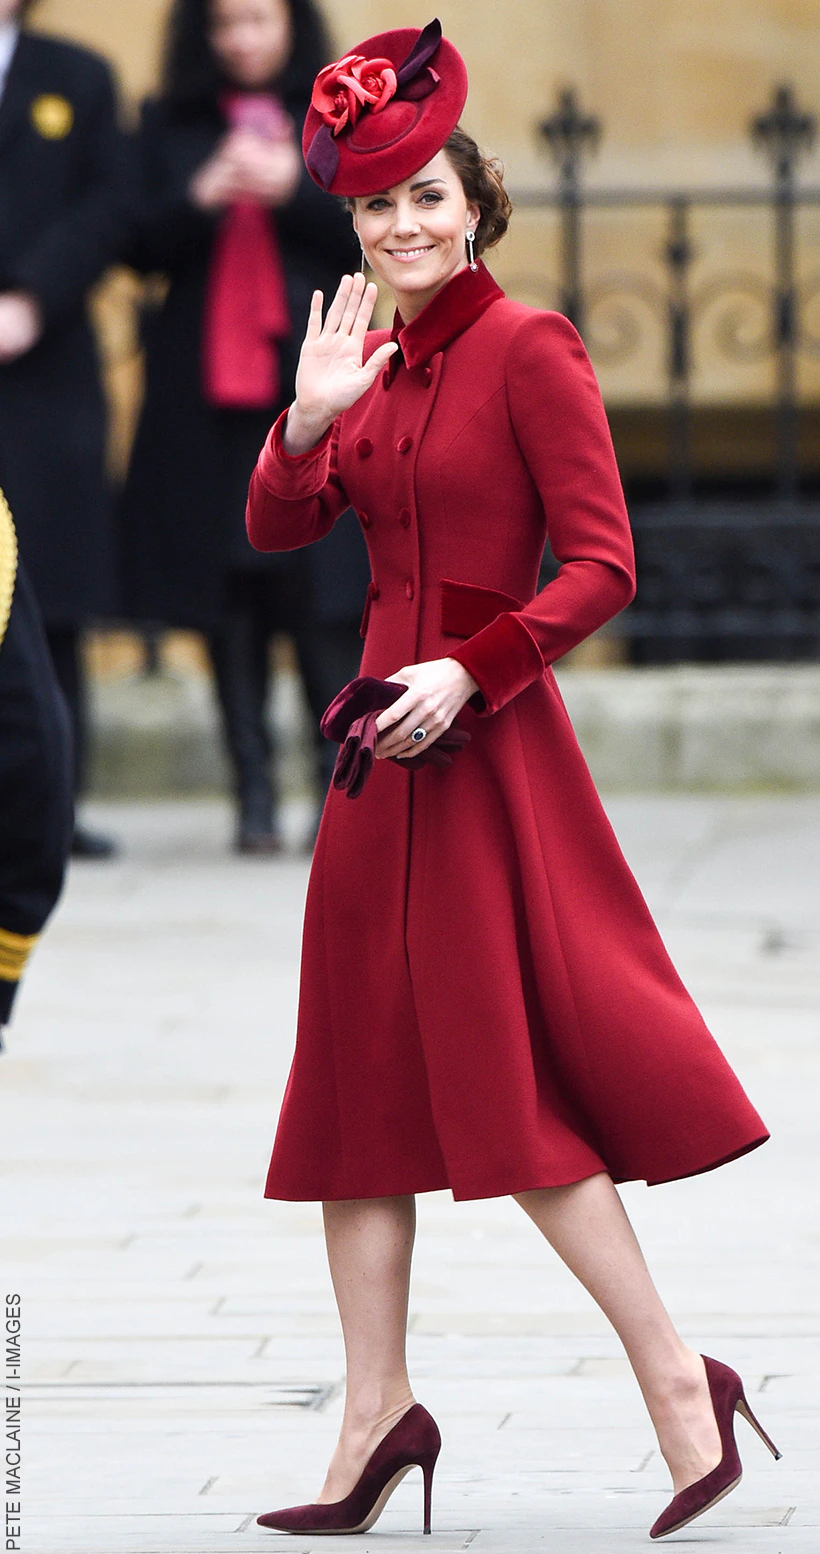 Kate looks ravishing in red!  The Princess of Wales wearing a pair of towering heels from one of her favourite Italian luxury shoe brands, Gianvito Rossi